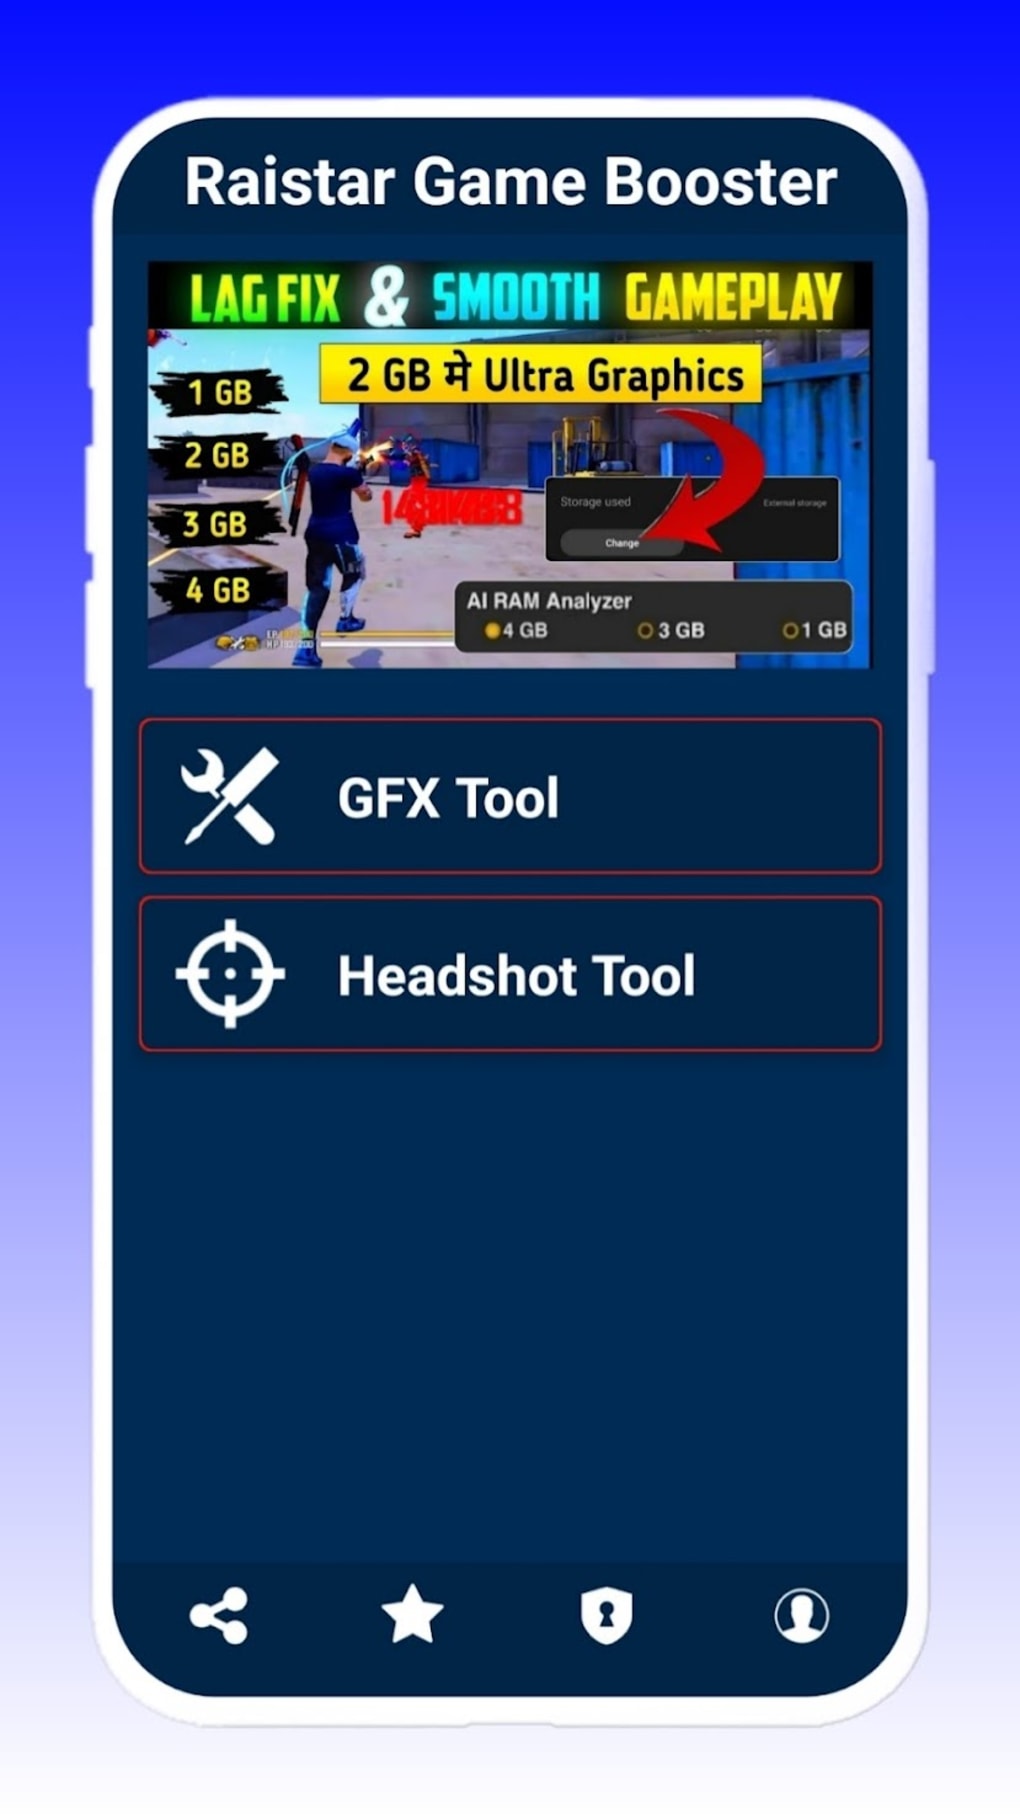 Gfx Tool For Free Fire Max, Smooth HD Setting, Colorful Graphics, Lag  Fix Best Setting